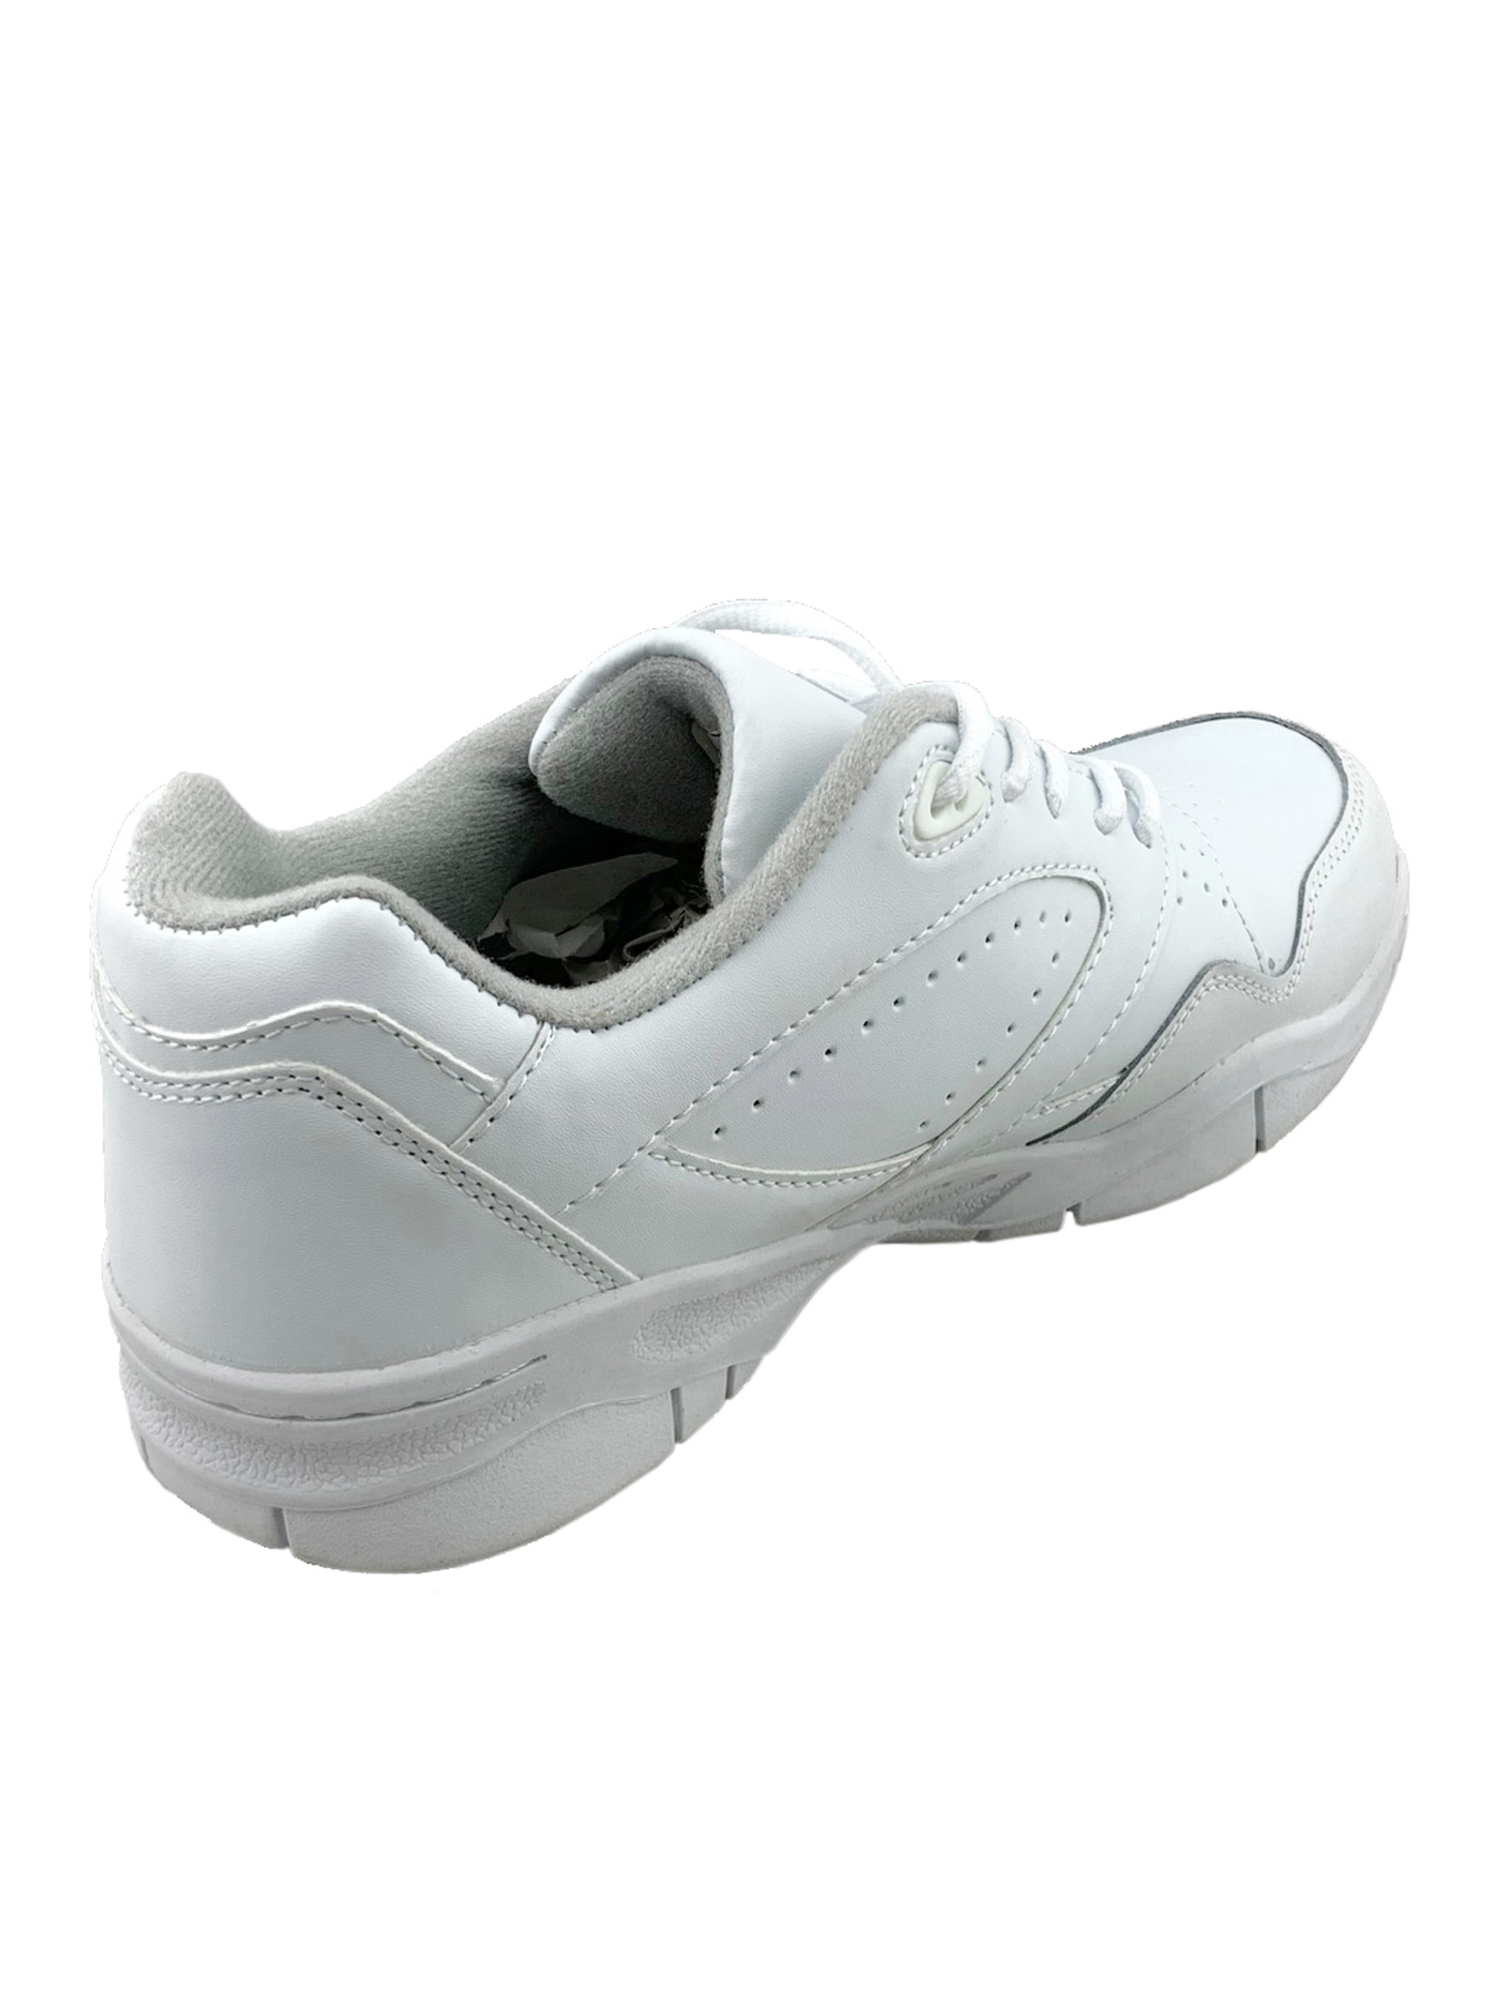 Tanleewa Men's Leather White Sports Shoes Lightweight Sneakers Breathable Casual Shoe Size 4.5 - image 5 of 5